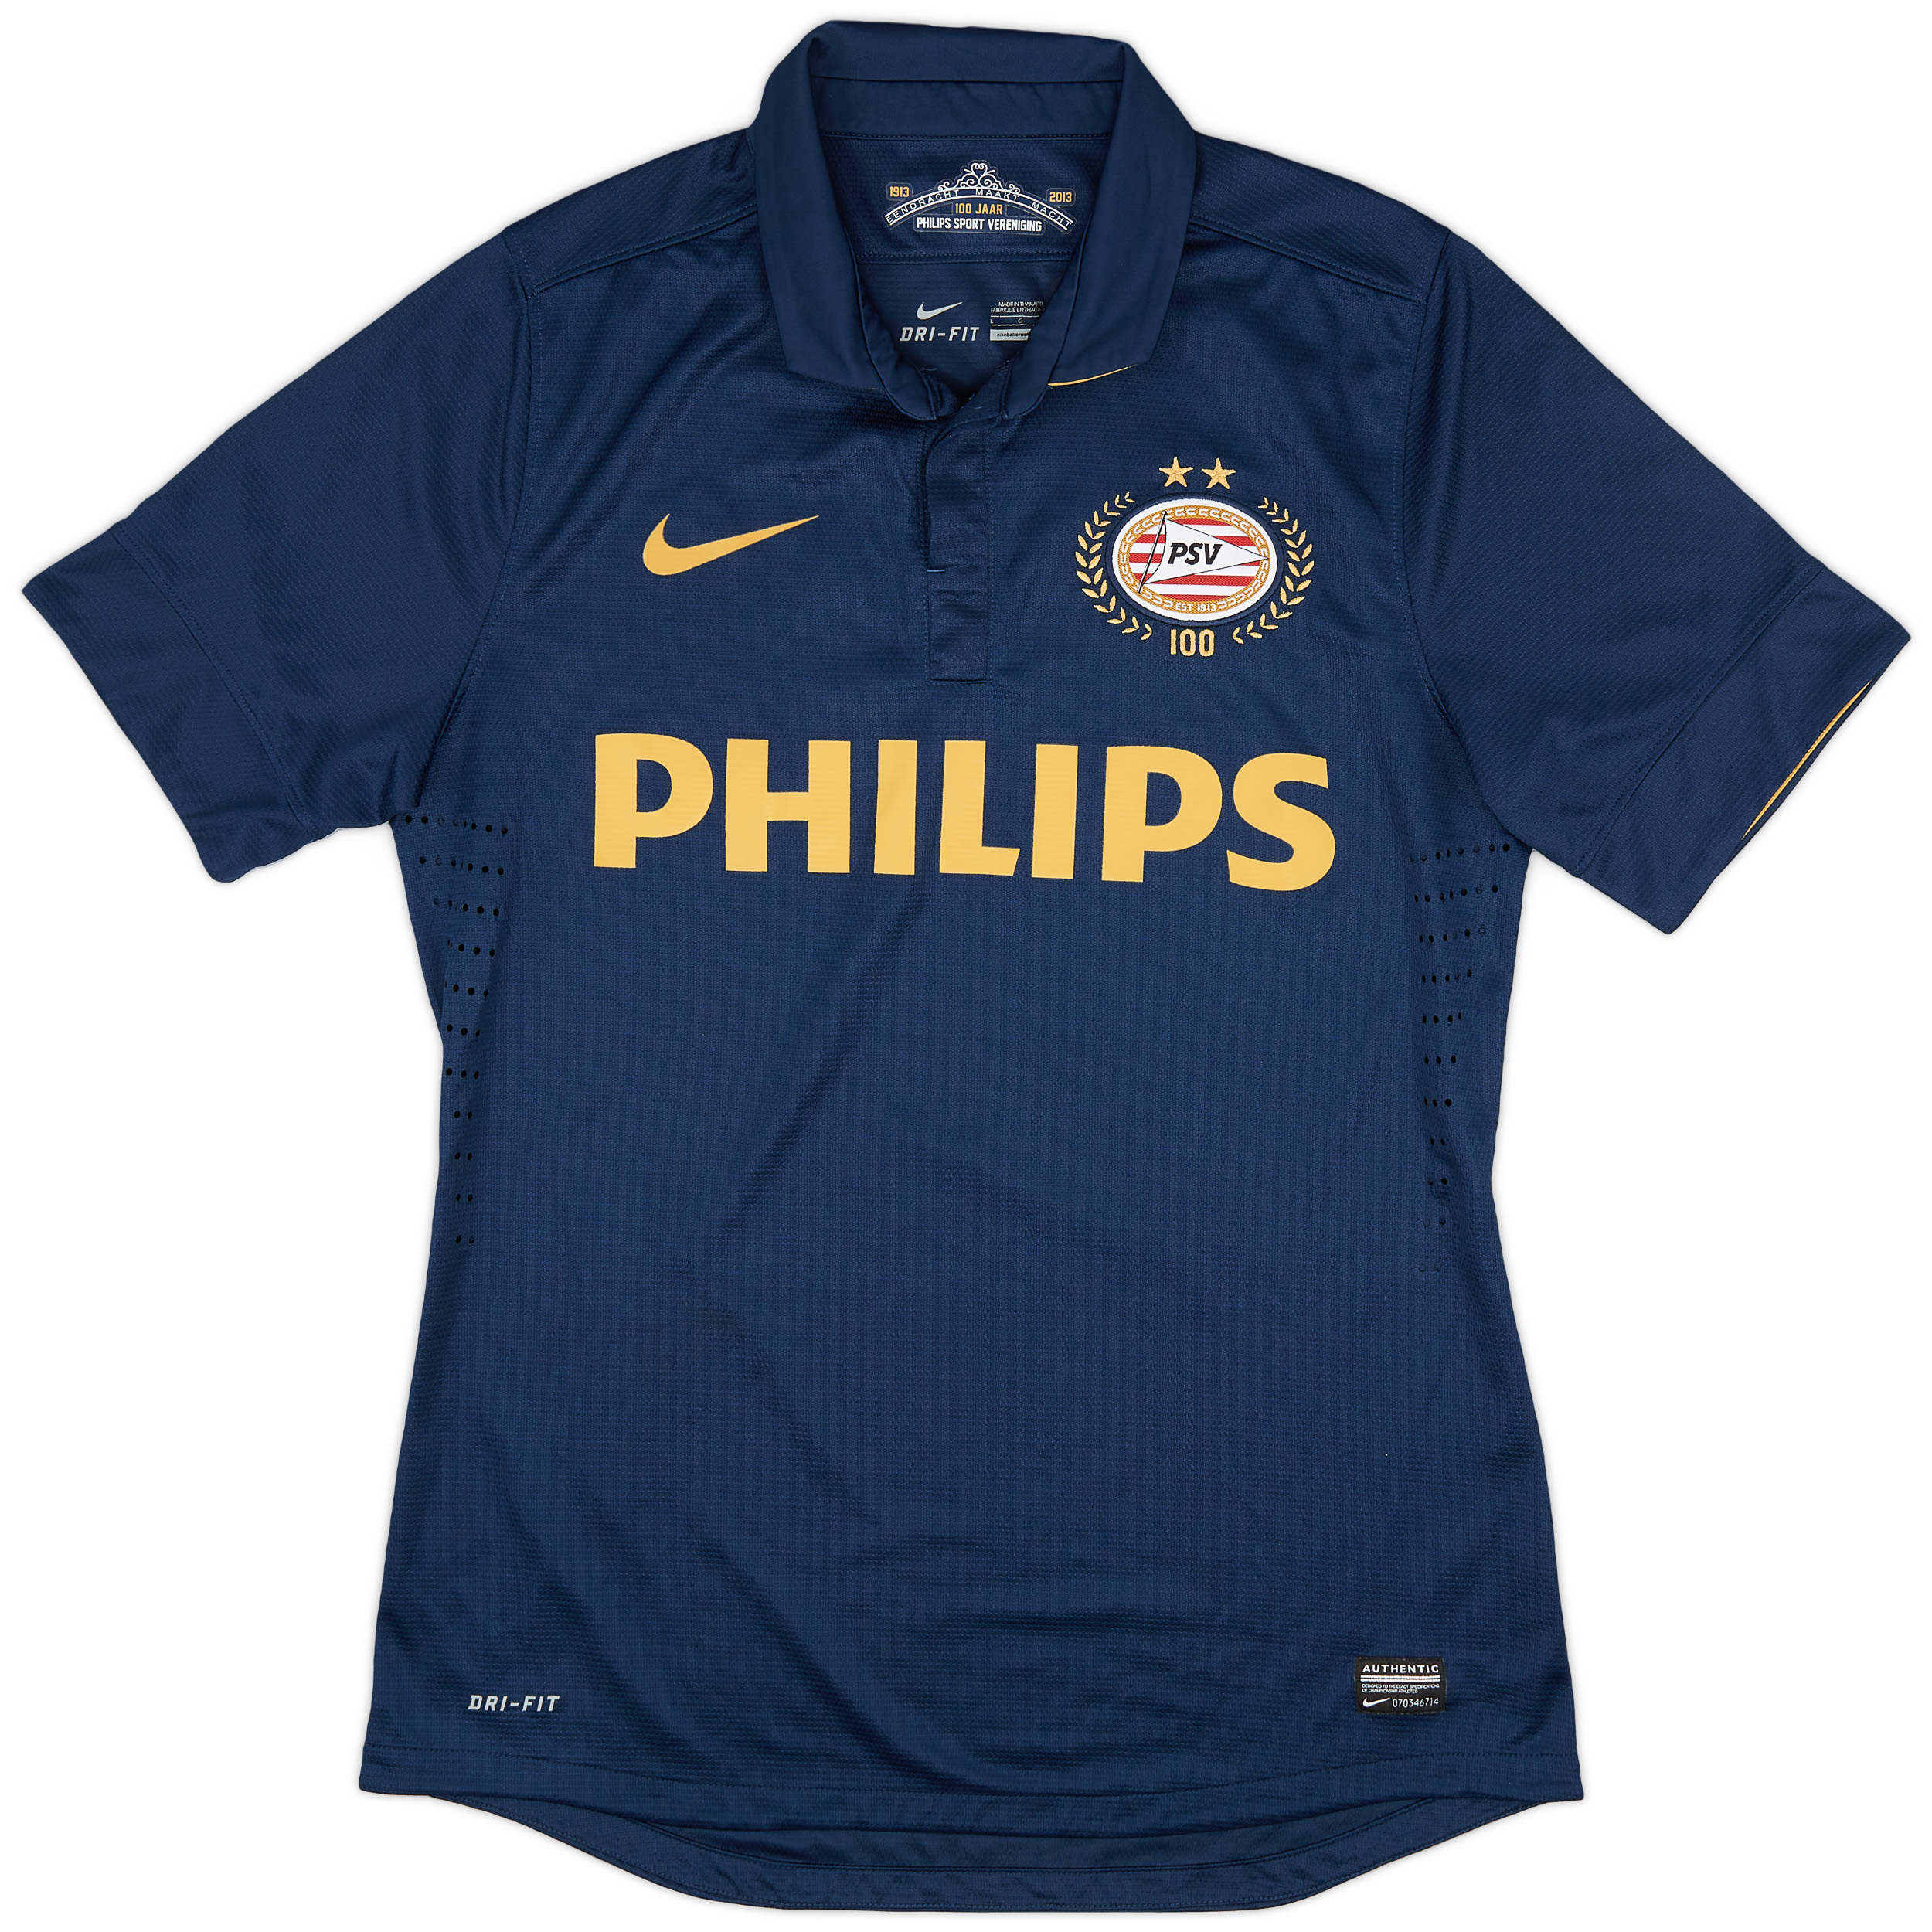 2013-14 PSV Player Issue Away Shirt - 9/10 - ()